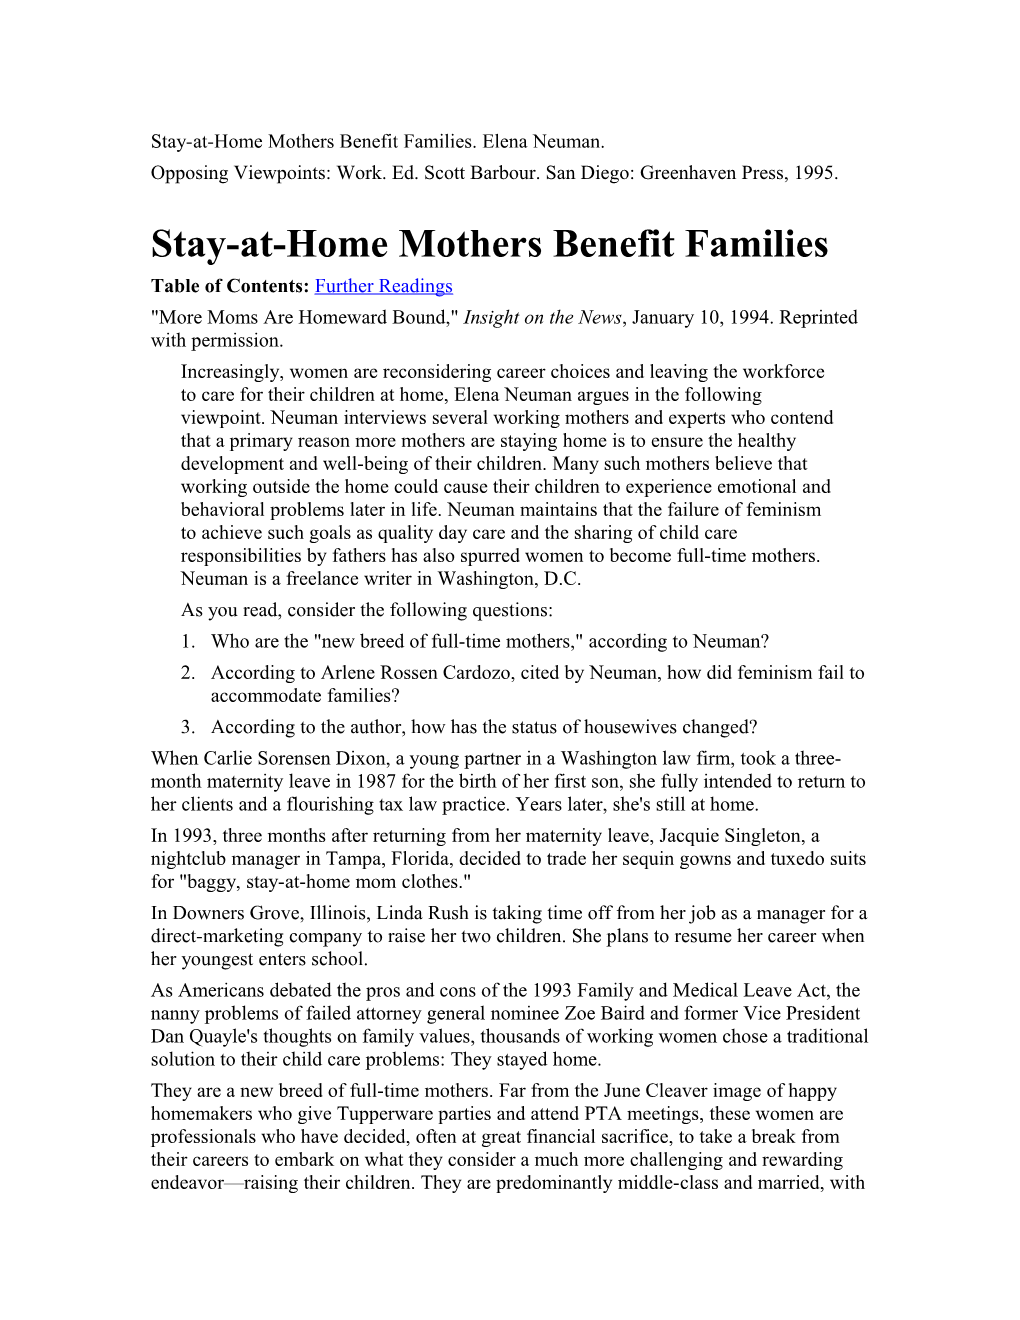 Stay-At-Home Mothers Benefit Families